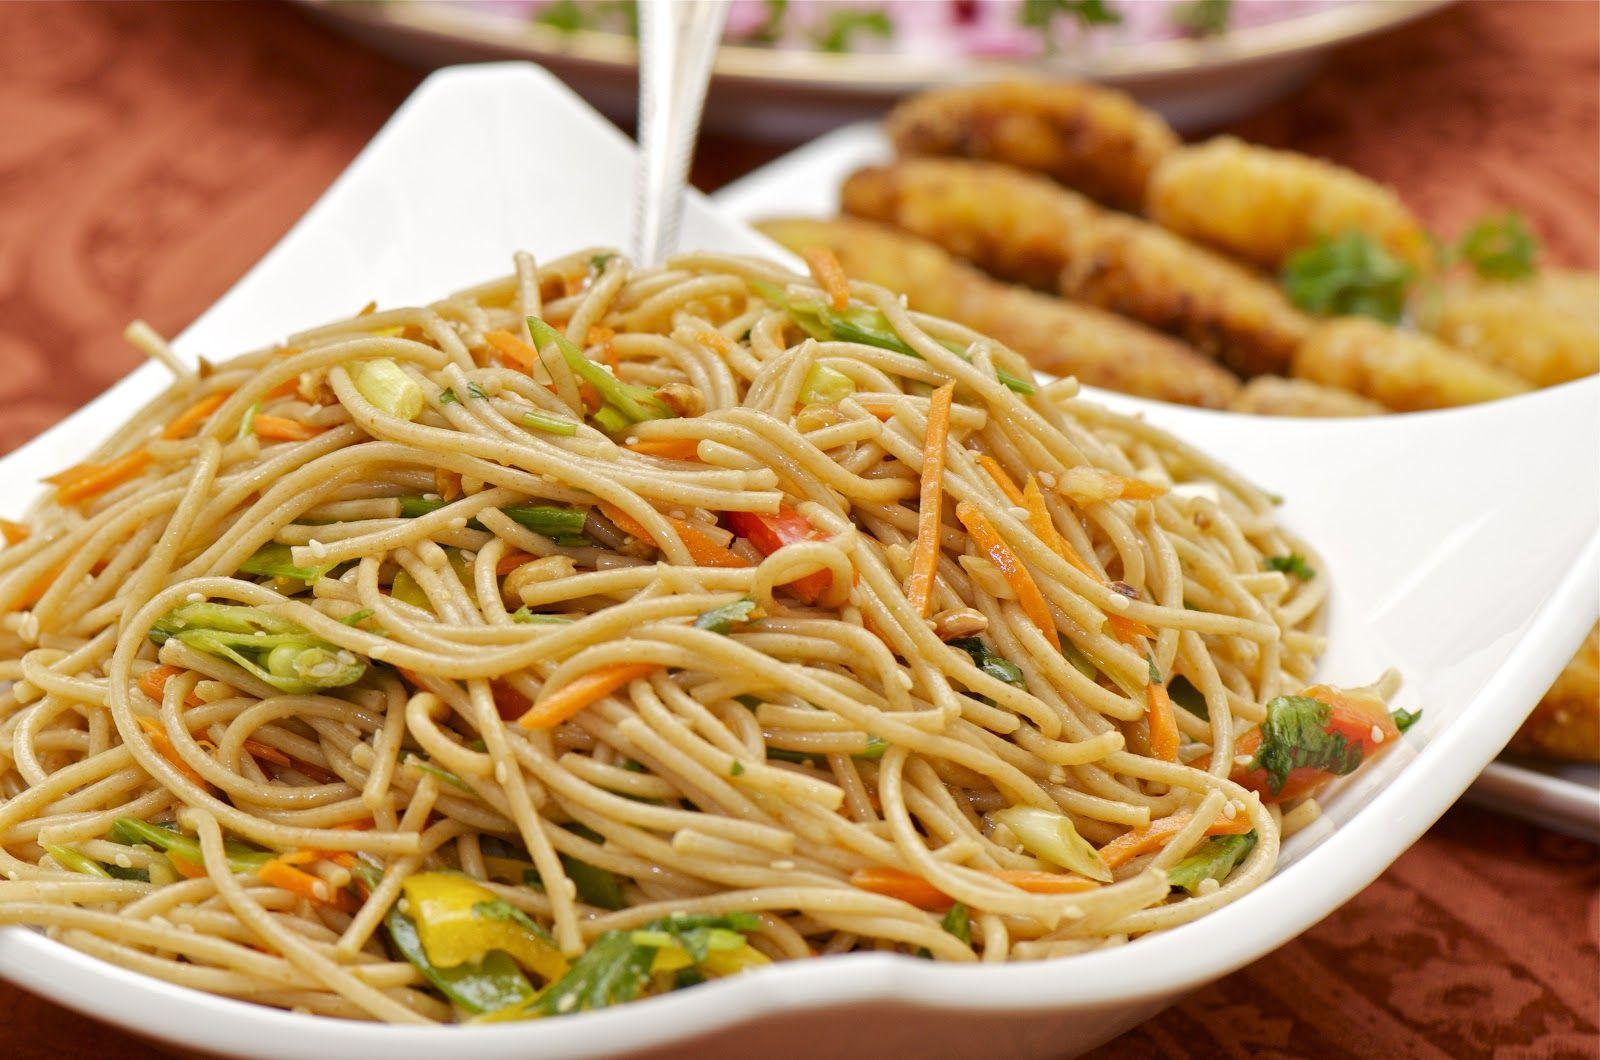 A bowl of chow mein noodles with vegetables and meat. - Pasta